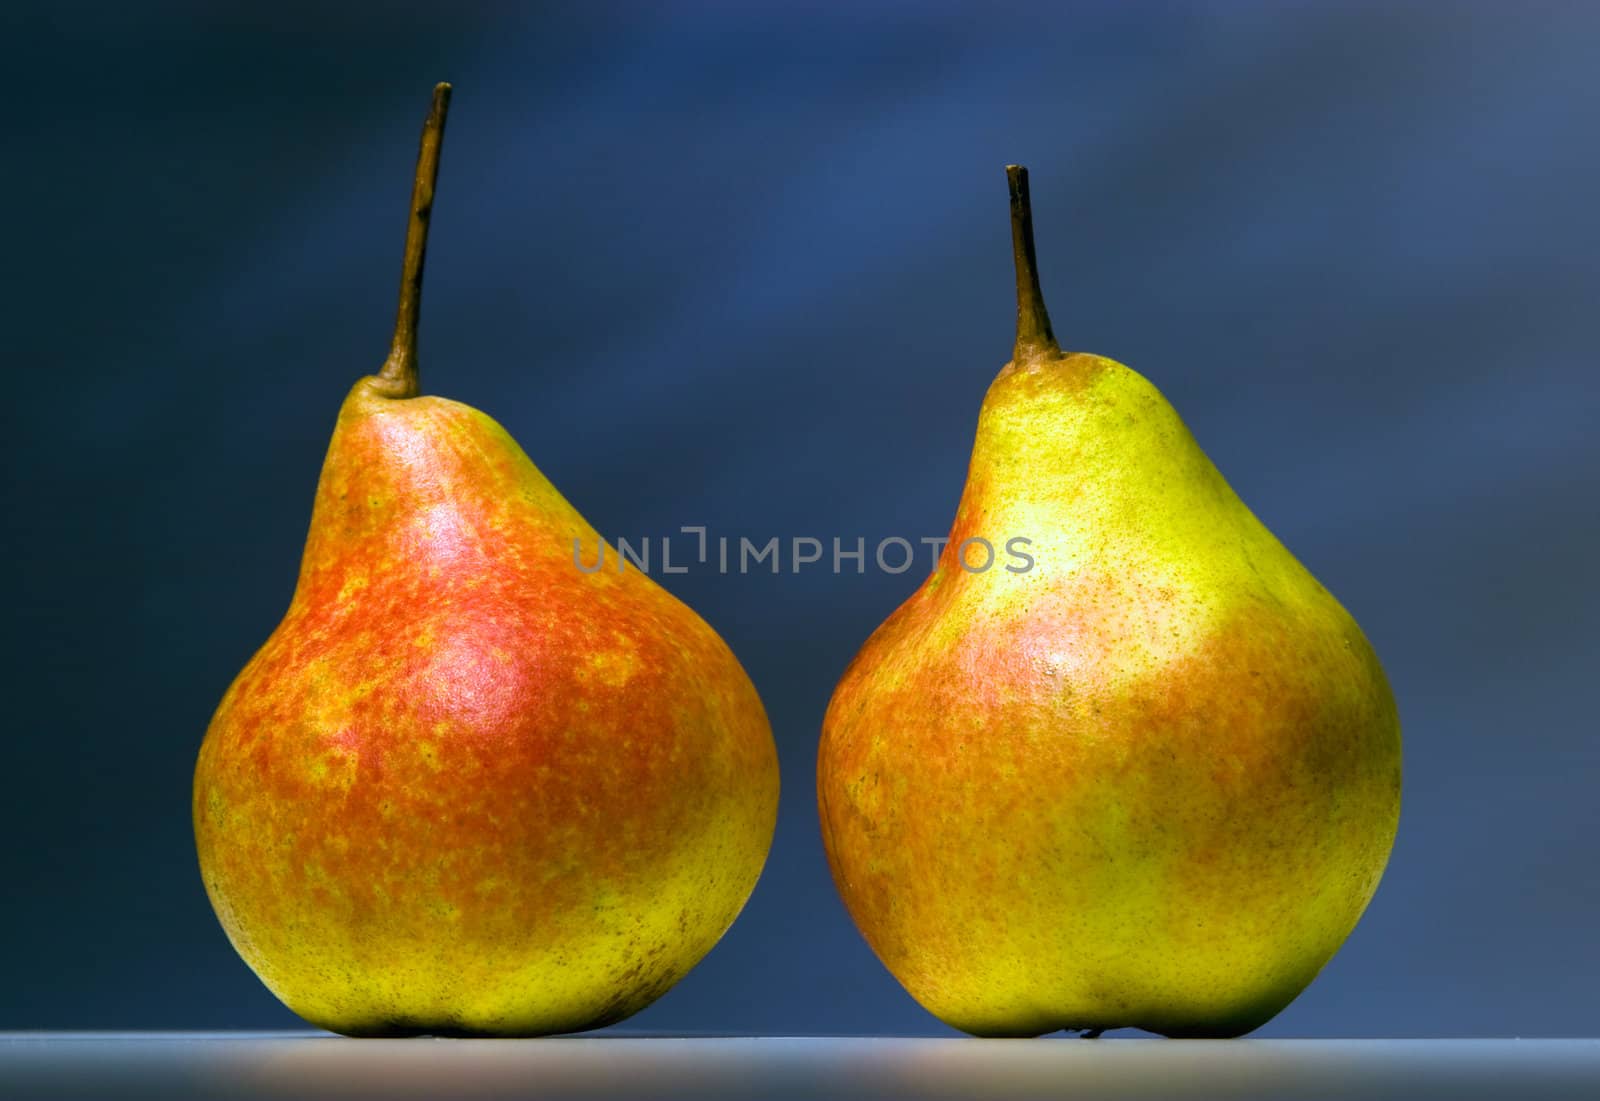 Two pears standing on a table on a dark background